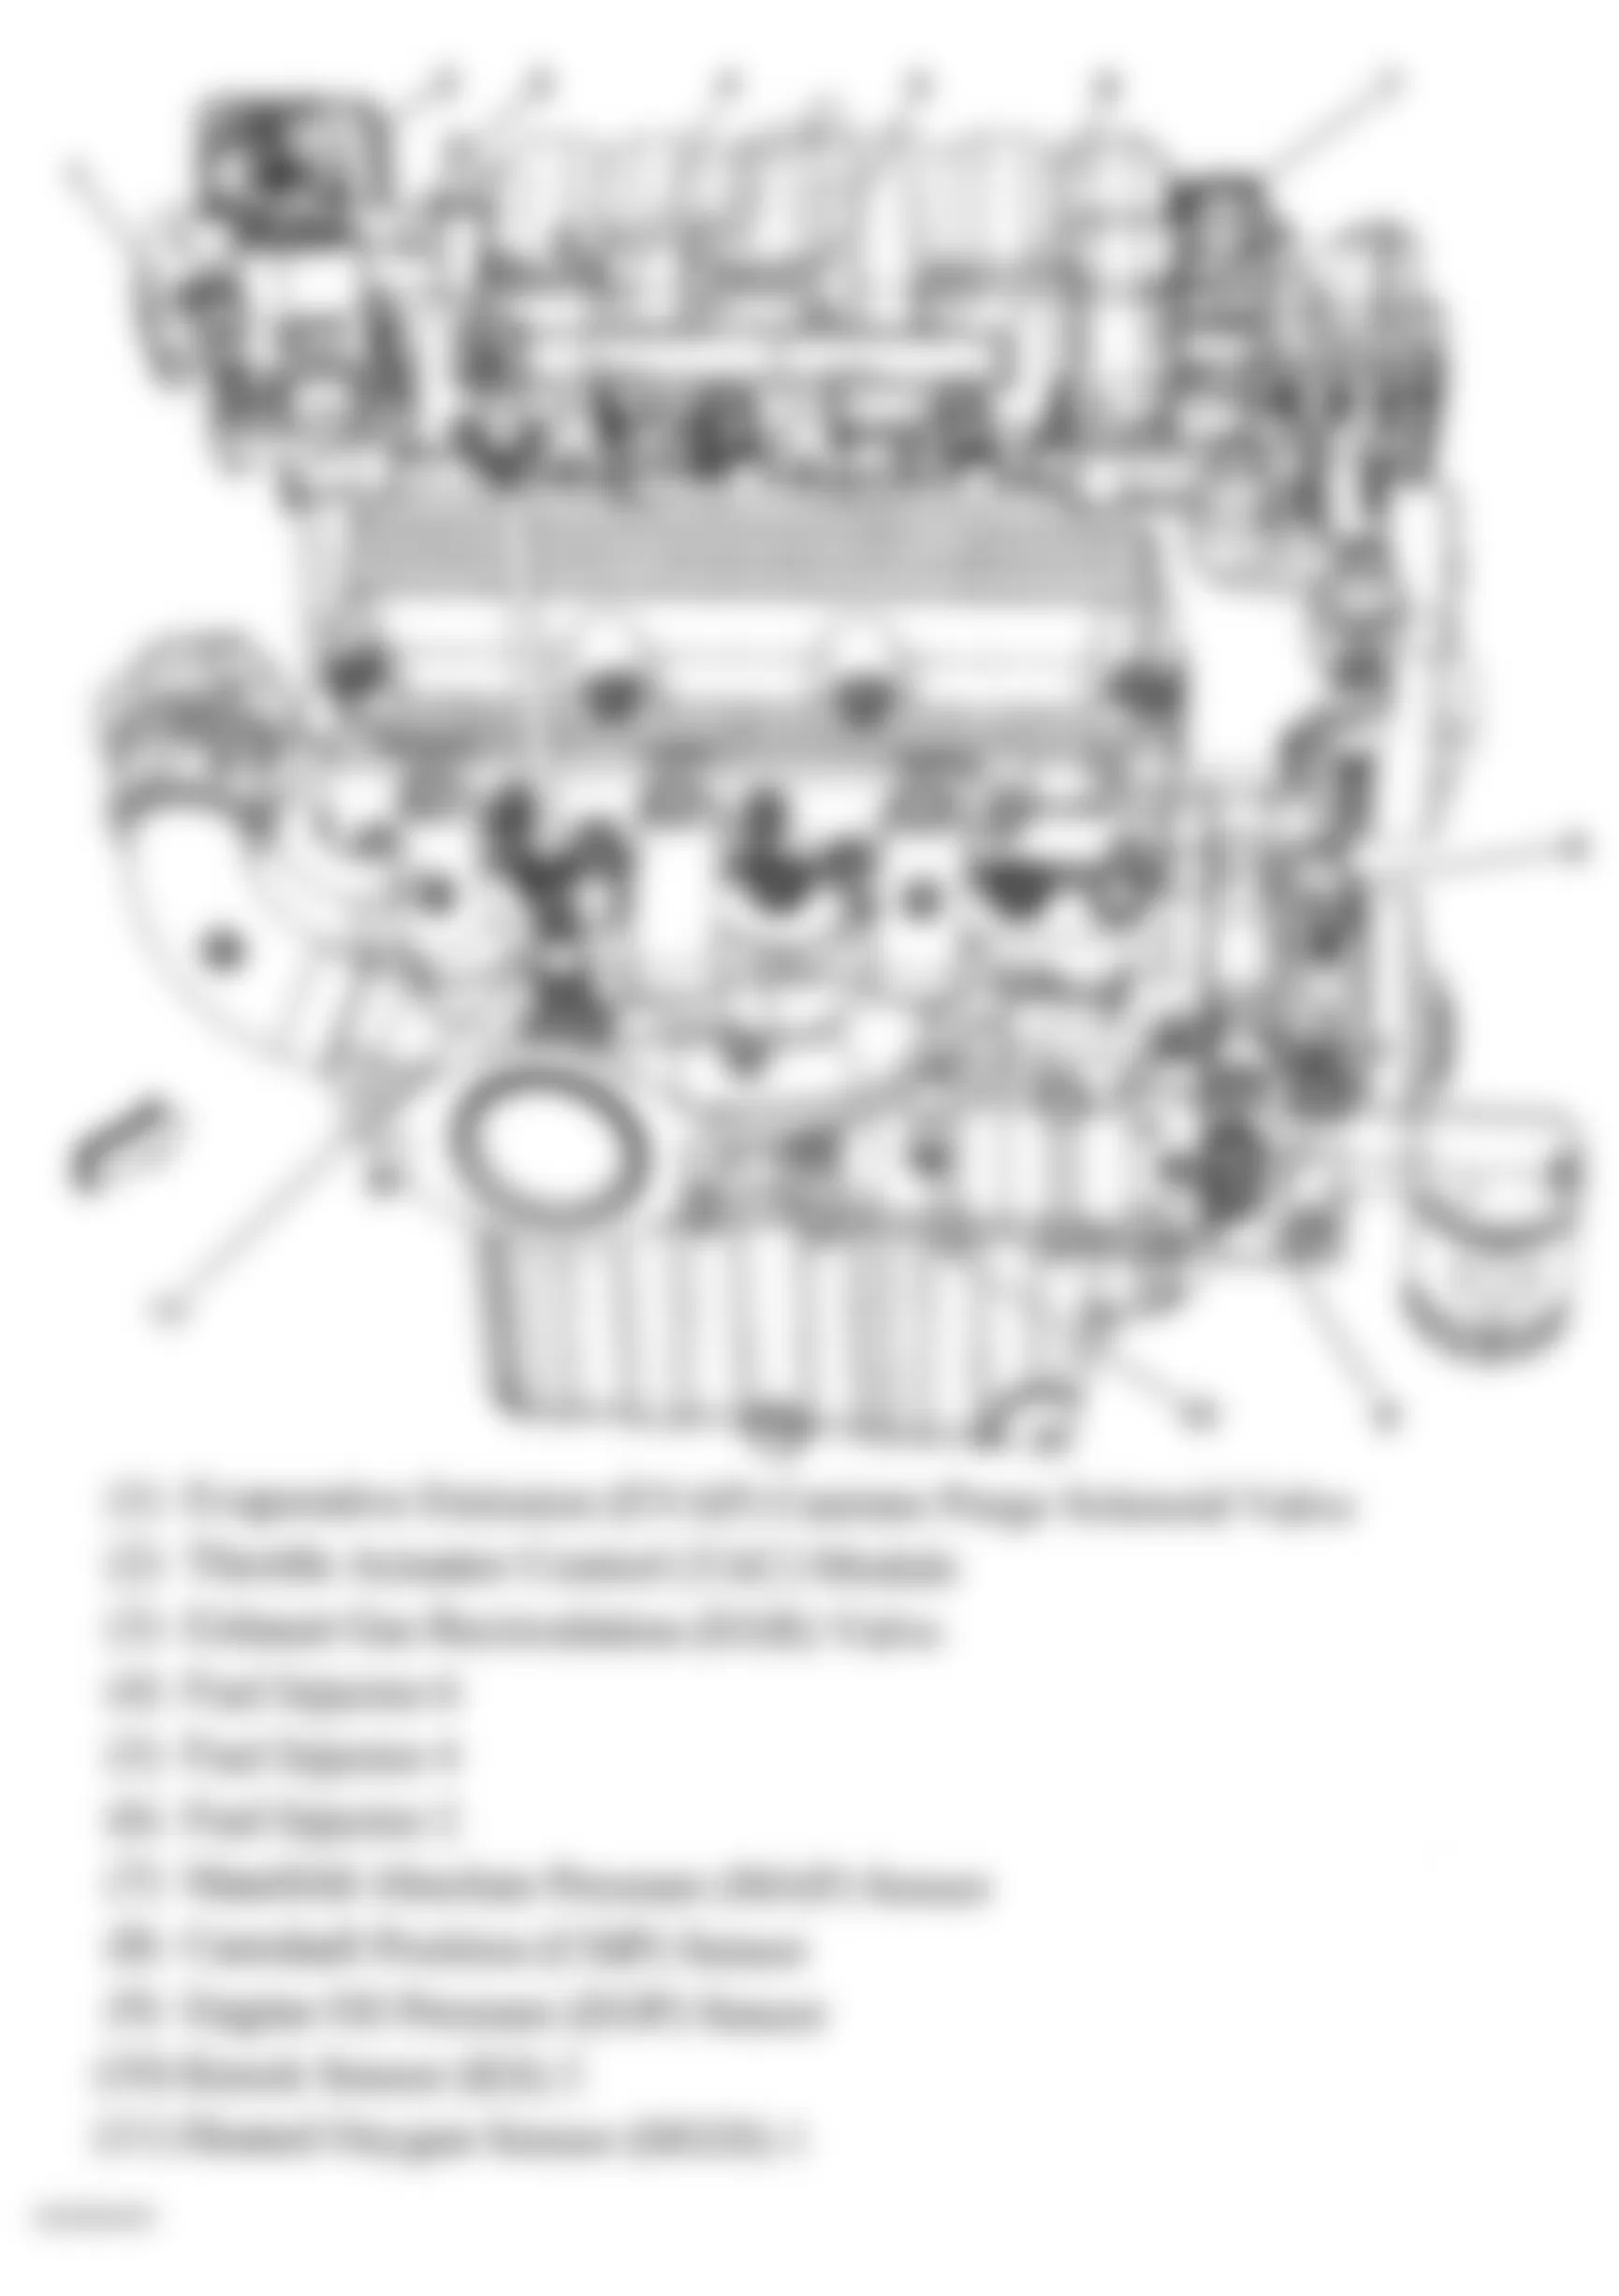 Buick LaCrosse CXL 2005 - Component Locations -  Right Side Of Engine (3.8L)